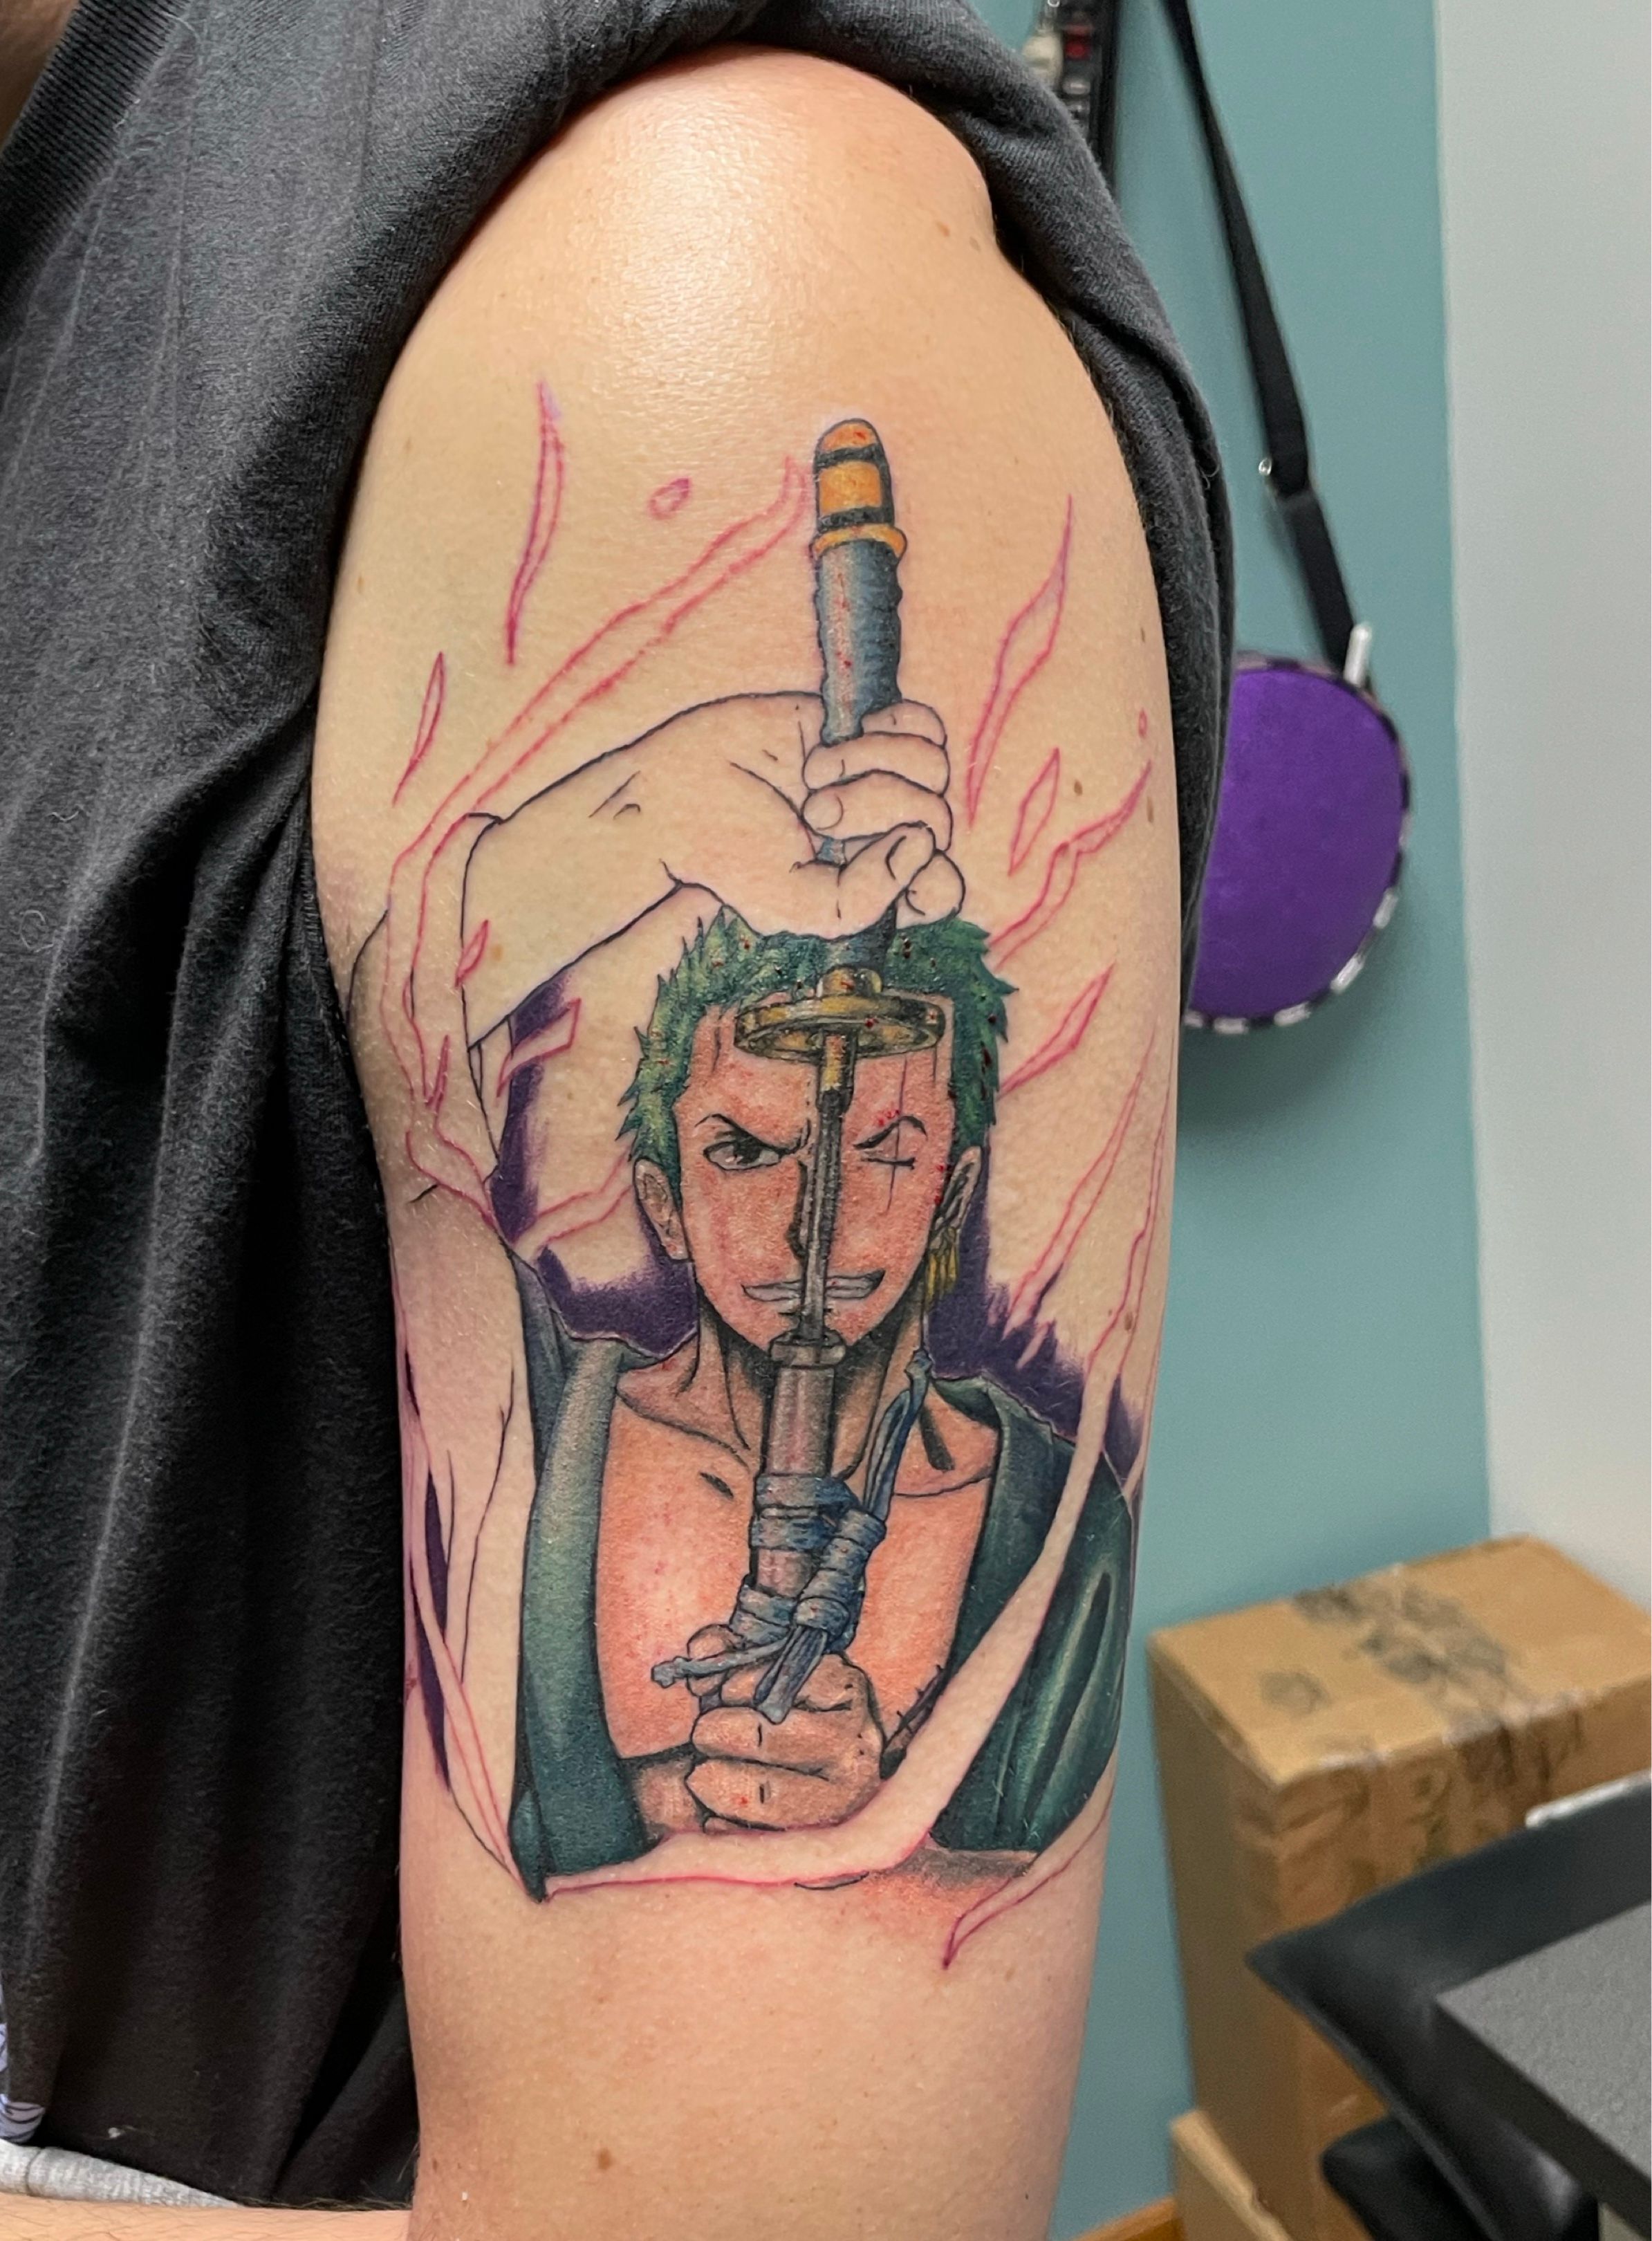 Sharing my Zoro tattoo Lets see some of your One Piece ink  rOnePiece